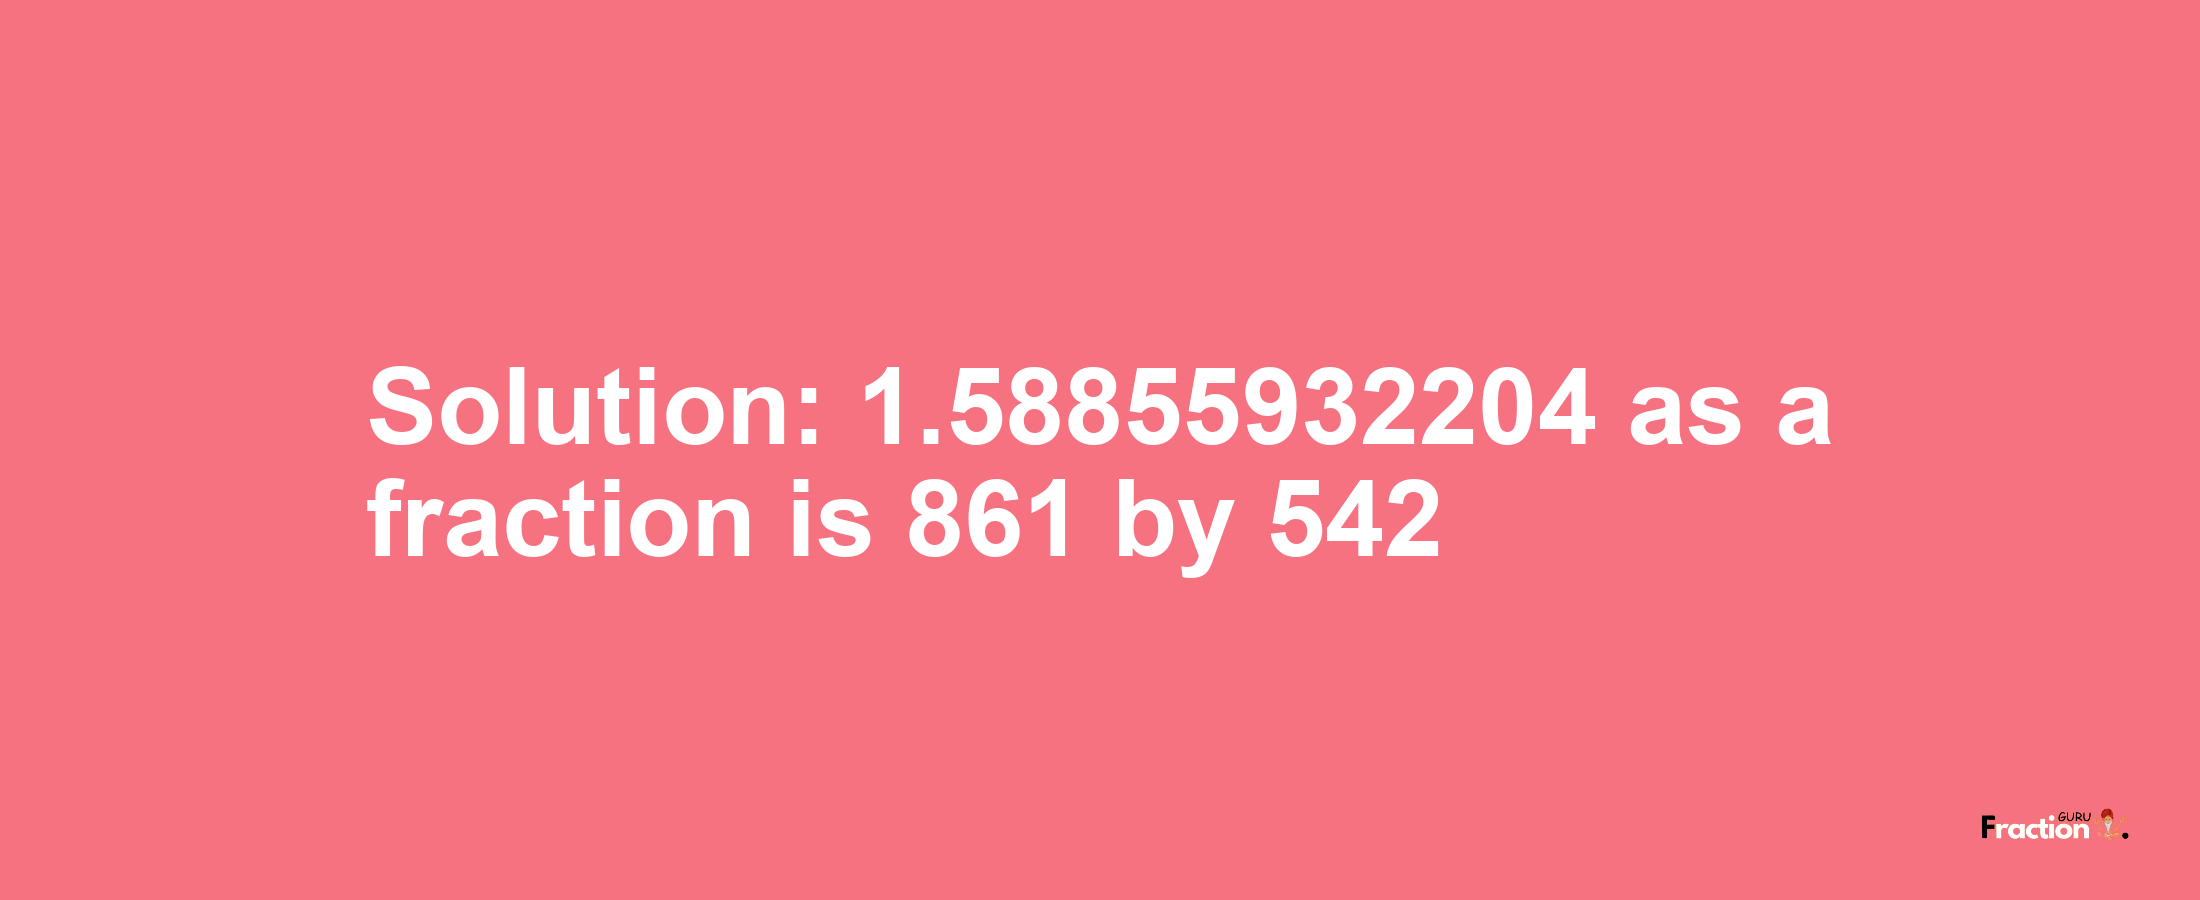 Solution:1.58855932204 as a fraction is 861/542